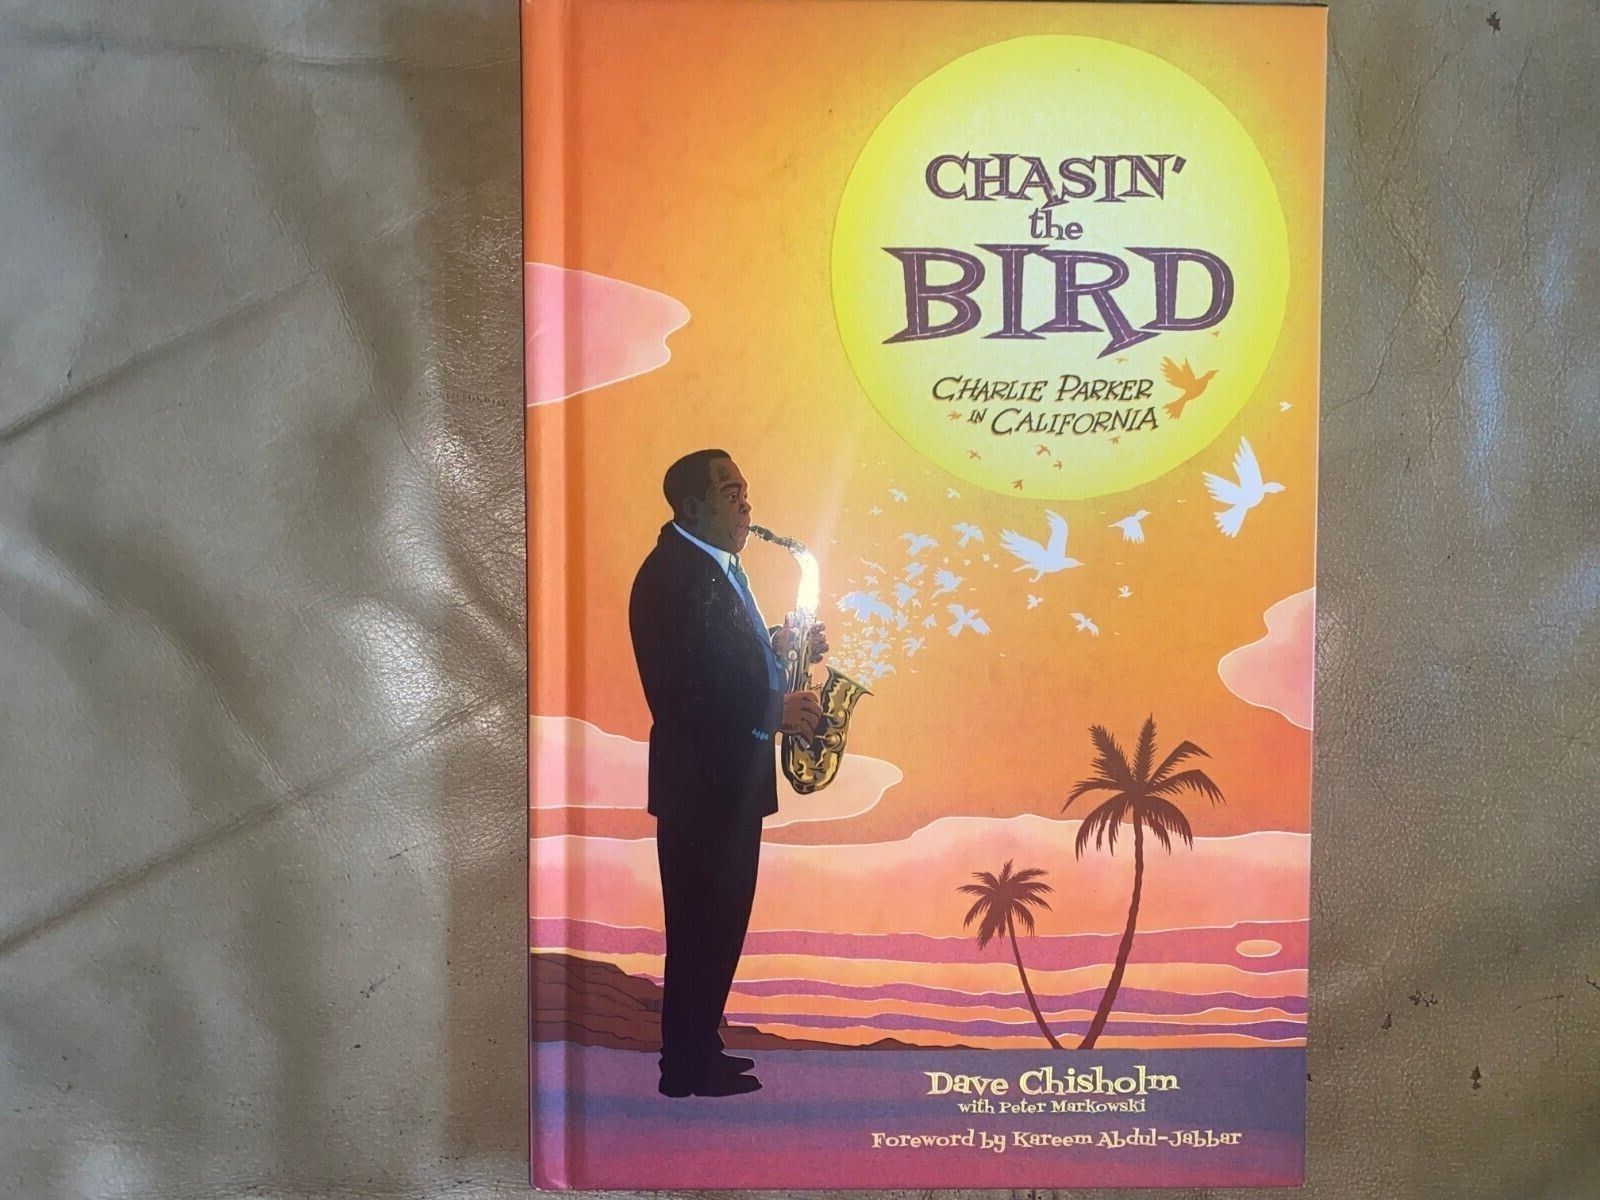 Chasin' The Bird: A Charlie Parker Graphic Novel by Chisholm. Z2 Comics, 2020.  